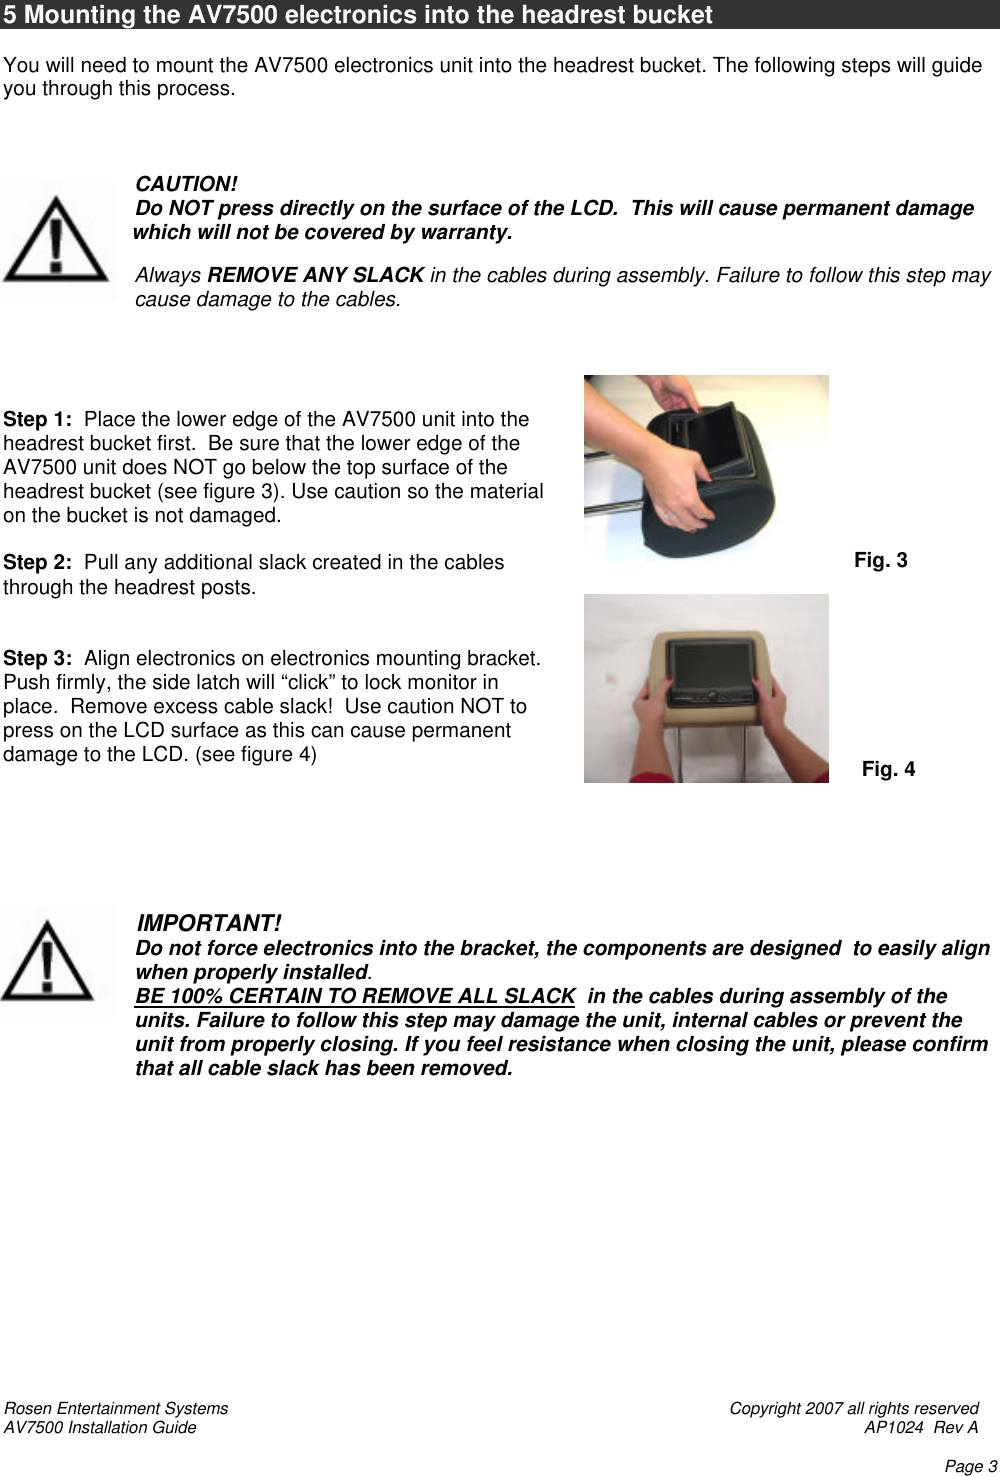 Rosen Entertainment Systems    Copyright 2007 all rights reserved AV7500 Installation Guide    AP1024  Rev A    Page 3  5 Mounting the AV7500 electronics into the headrest bucket  You will need to mount the AV7500 electronics unit into the headrest bucket. The following steps will guide you through this process.    CAUTION! Do NOT press directly on the surface of the LCD.  This will cause permanent damage to the LCD    which will not be covered by warranty.    Always REMOVE ANY SLACK in the cables during assembly. Failure to follow this step may cause damage to the cables.     Step 1:  Place the lower edge of the AV7500 unit into the headrest bucket first.  Be sure that the lower edge of the AV7500 unit does NOT go below the top surface of the headrest bucket (see figure 3). Use caution so the material on the bucket is not damaged.    Step 2:  Pull any additional slack created in the cables through the headrest posts.   Step 3:  Align electronics on electronics mounting bracket.  Push firmly, the side latch will “click” to lock monitor in place.  Remove excess cable slack!  Use caution NOT to press on the LCD surface as this can cause permanent damage to the LCD. (see figure 4)                              IMPORTANT! Do not force electronics into the bracket, the components are designed  to easily align     when properly installed.      BE 100% CERTAIN TO REMOVE ALL SLACK  in the cables during assembly of the units. Failure to follow this step may damage the unit, internal cables or prevent the unit from properly closing. If you feel resistance when closing the unit, please confirm that all cable slack has been removed.               Fig. 3  Fig. 4  